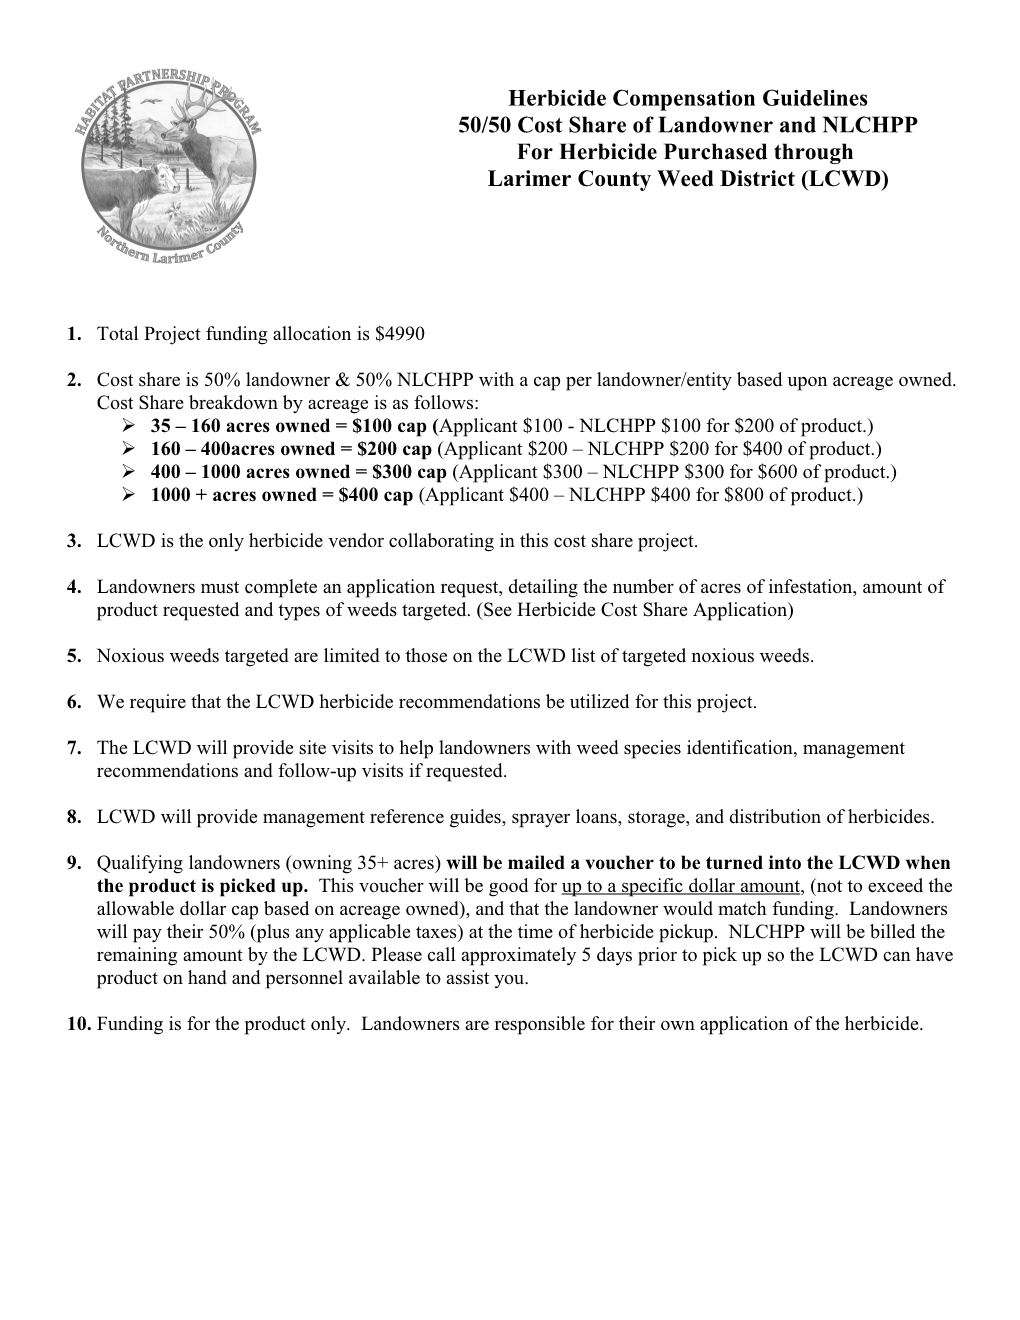 NLC Herbicide Voucher Guidelines and Application